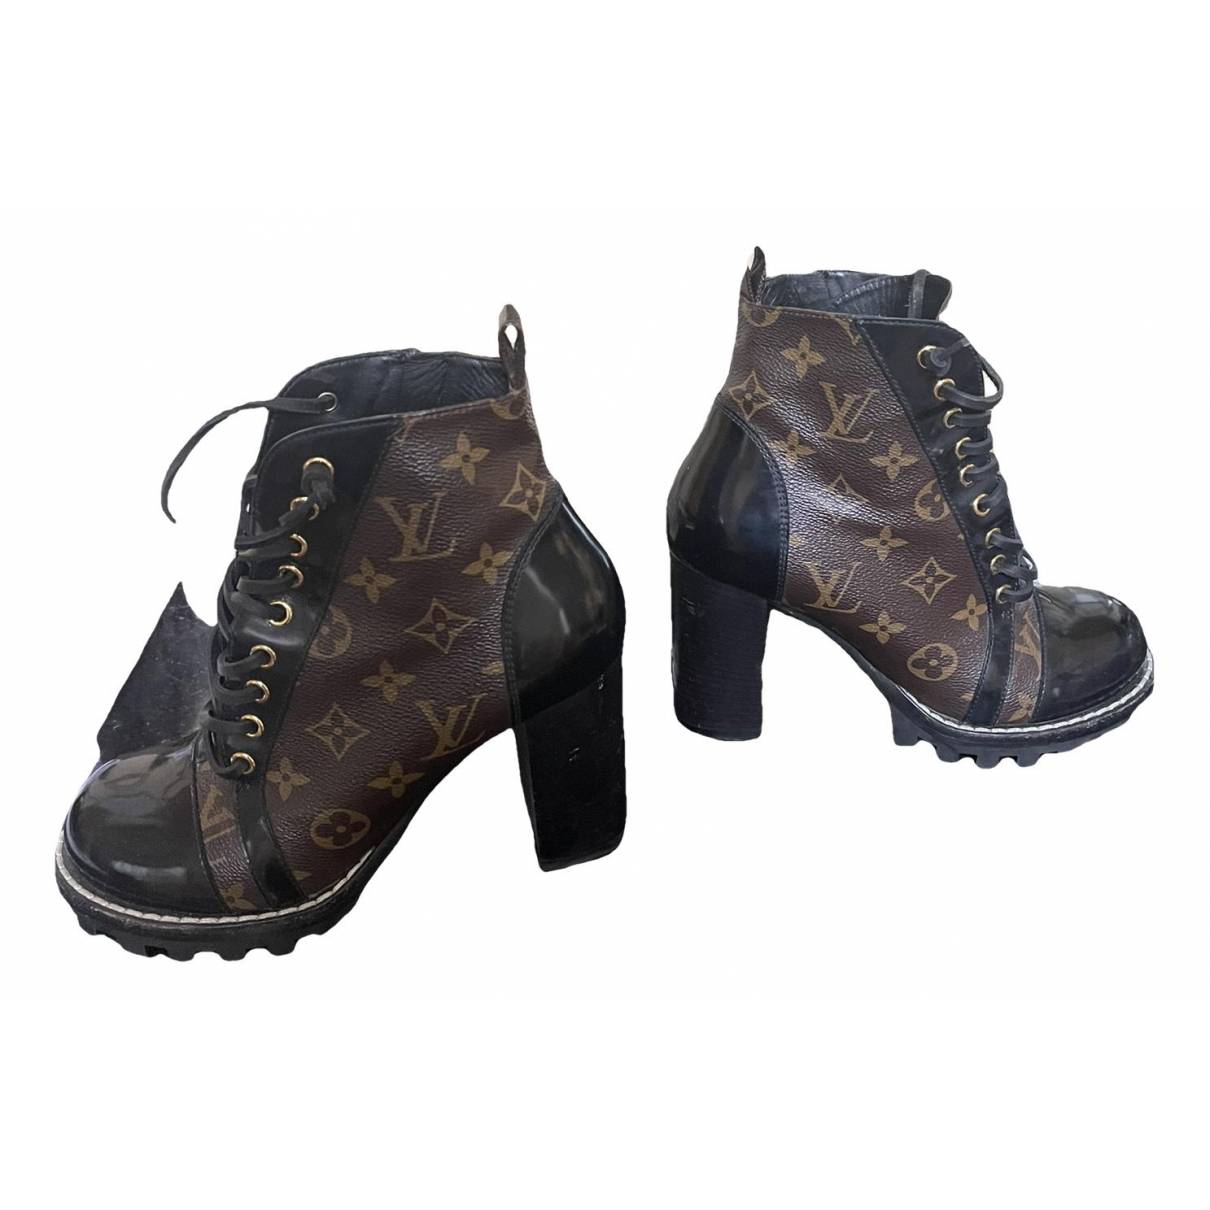 Star trail leather lace up boots Louis Vuitton Brown size 38 EU in